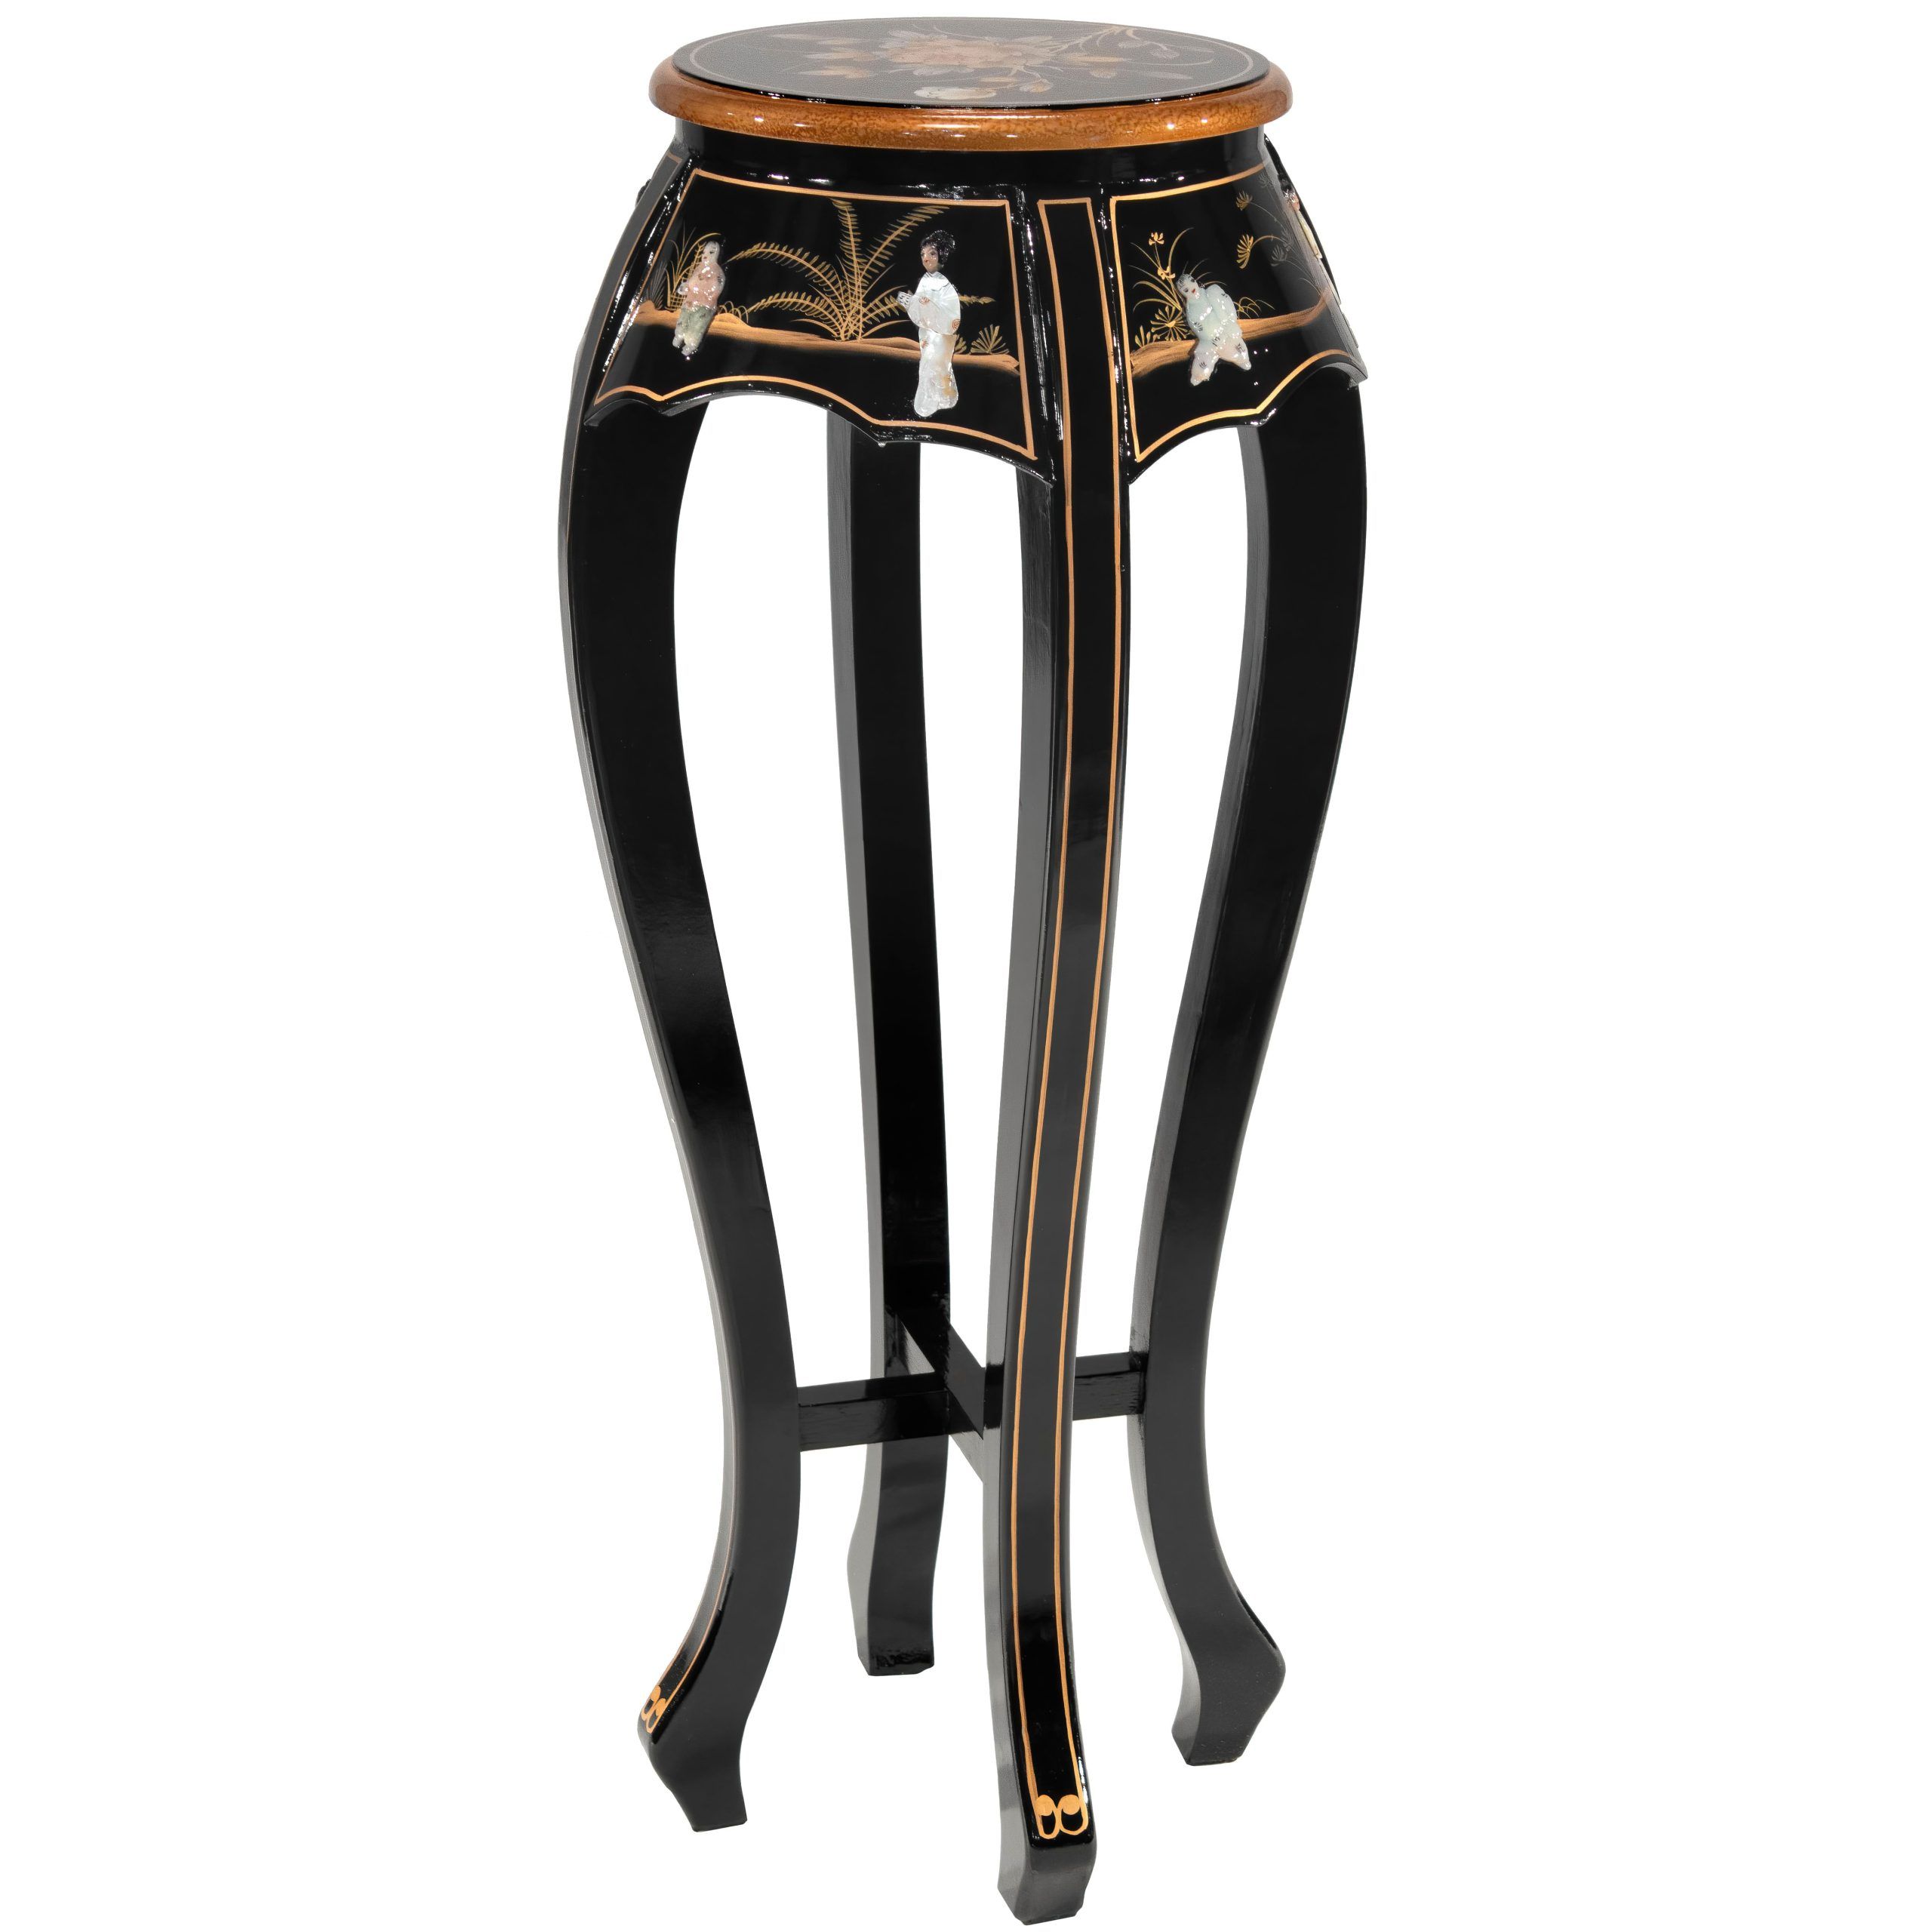 Popular 36 Inch Plant Stands Throughout Oriental Furniture 15" X 15" X 36" Black Wood Plant Stand – Walmart (View 9 of 15)